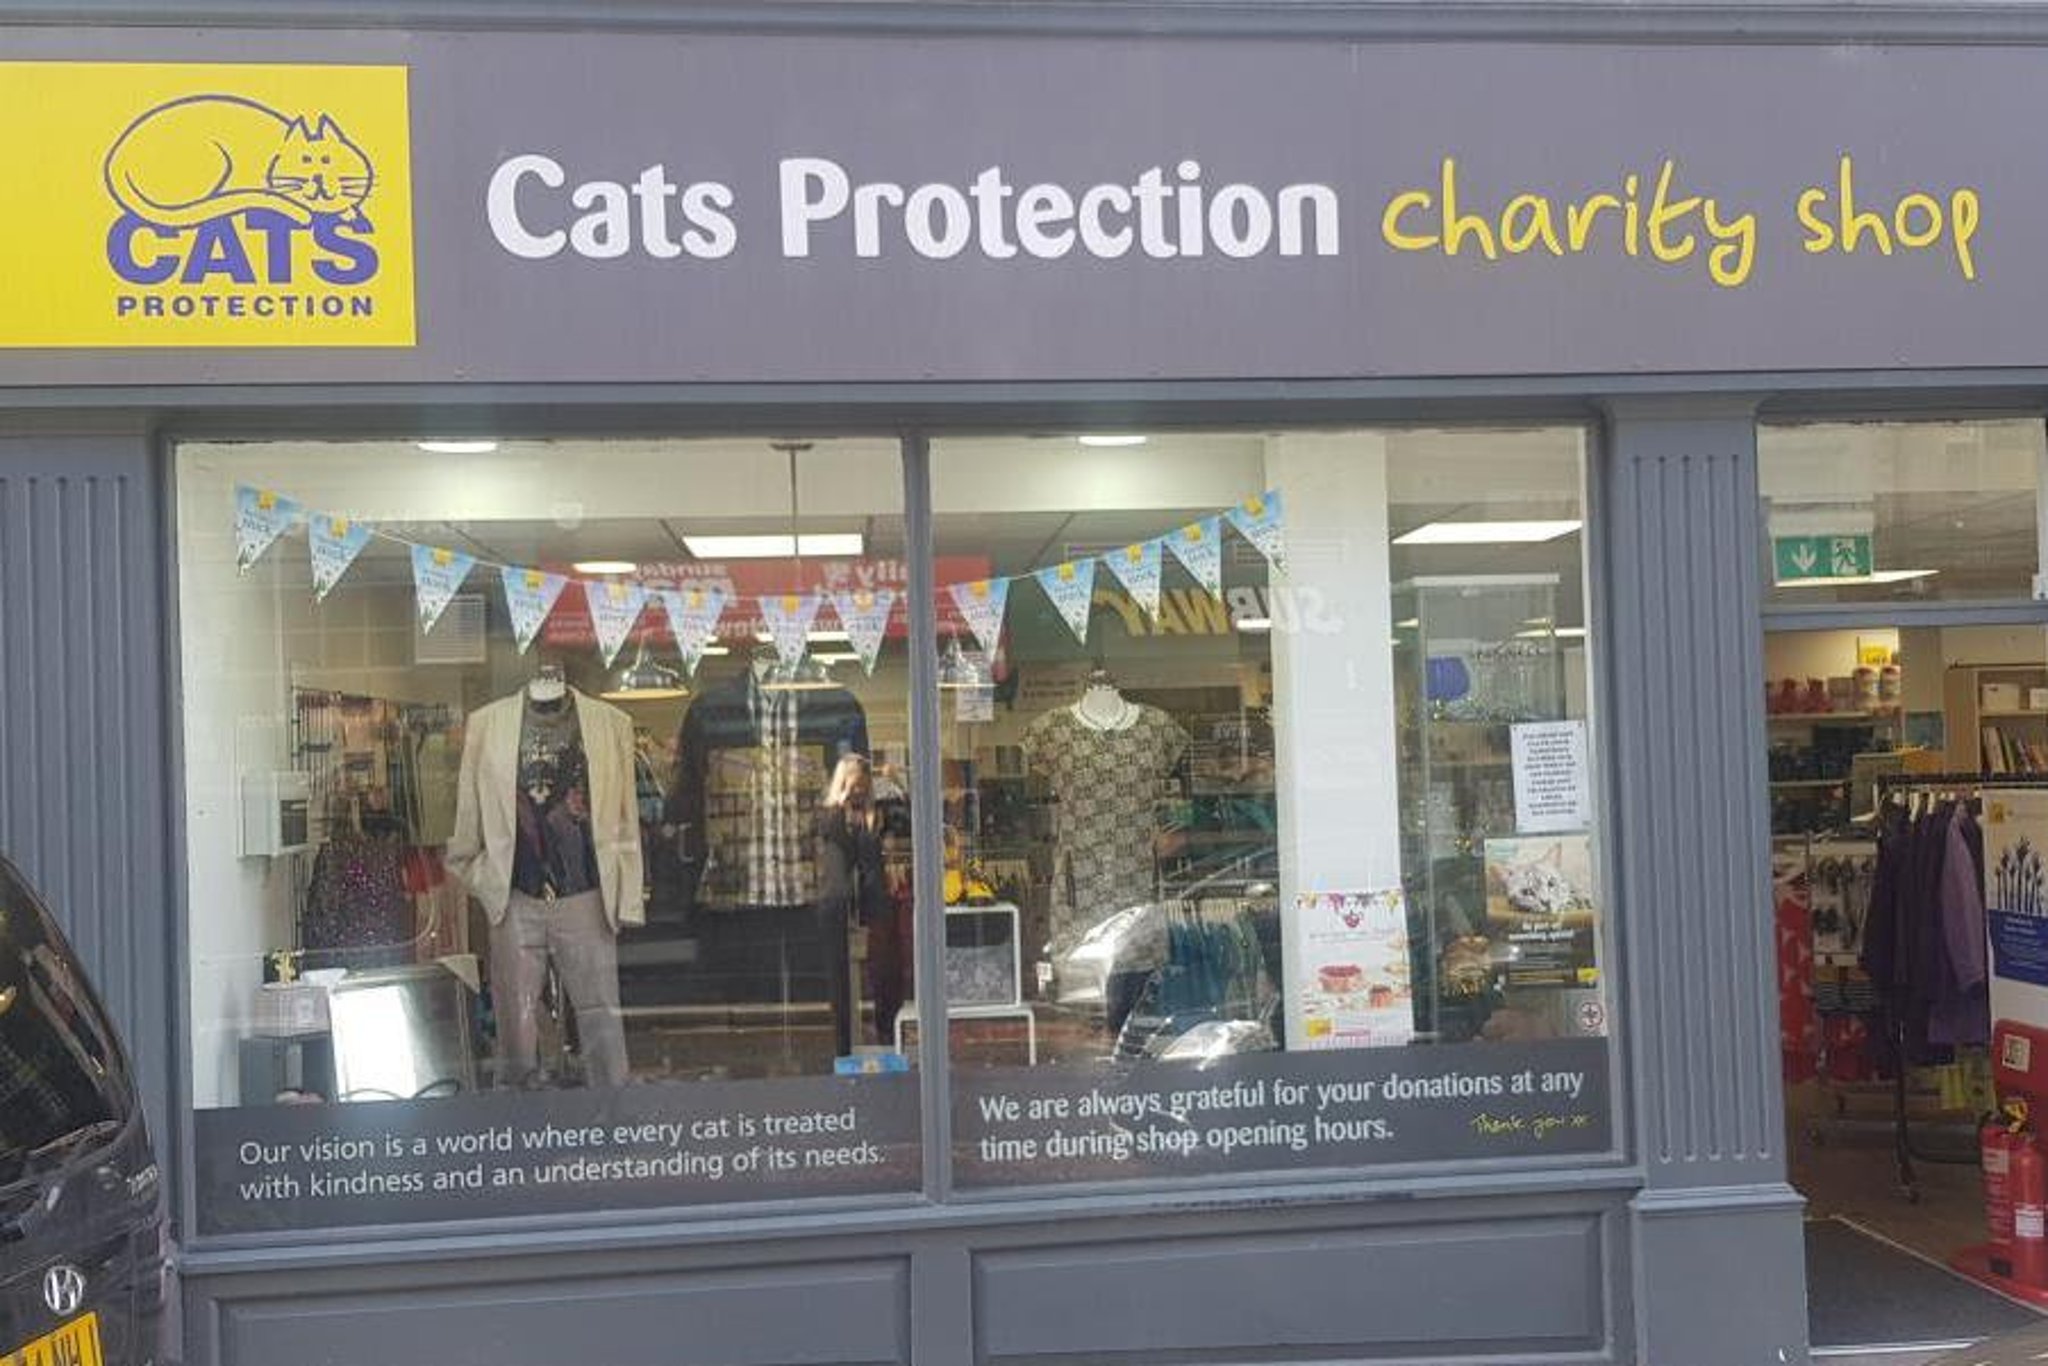 Falkirk S Cats Protection Shops Excited To Welcome Back Customers As Restrictions Ease Falkirk Herald